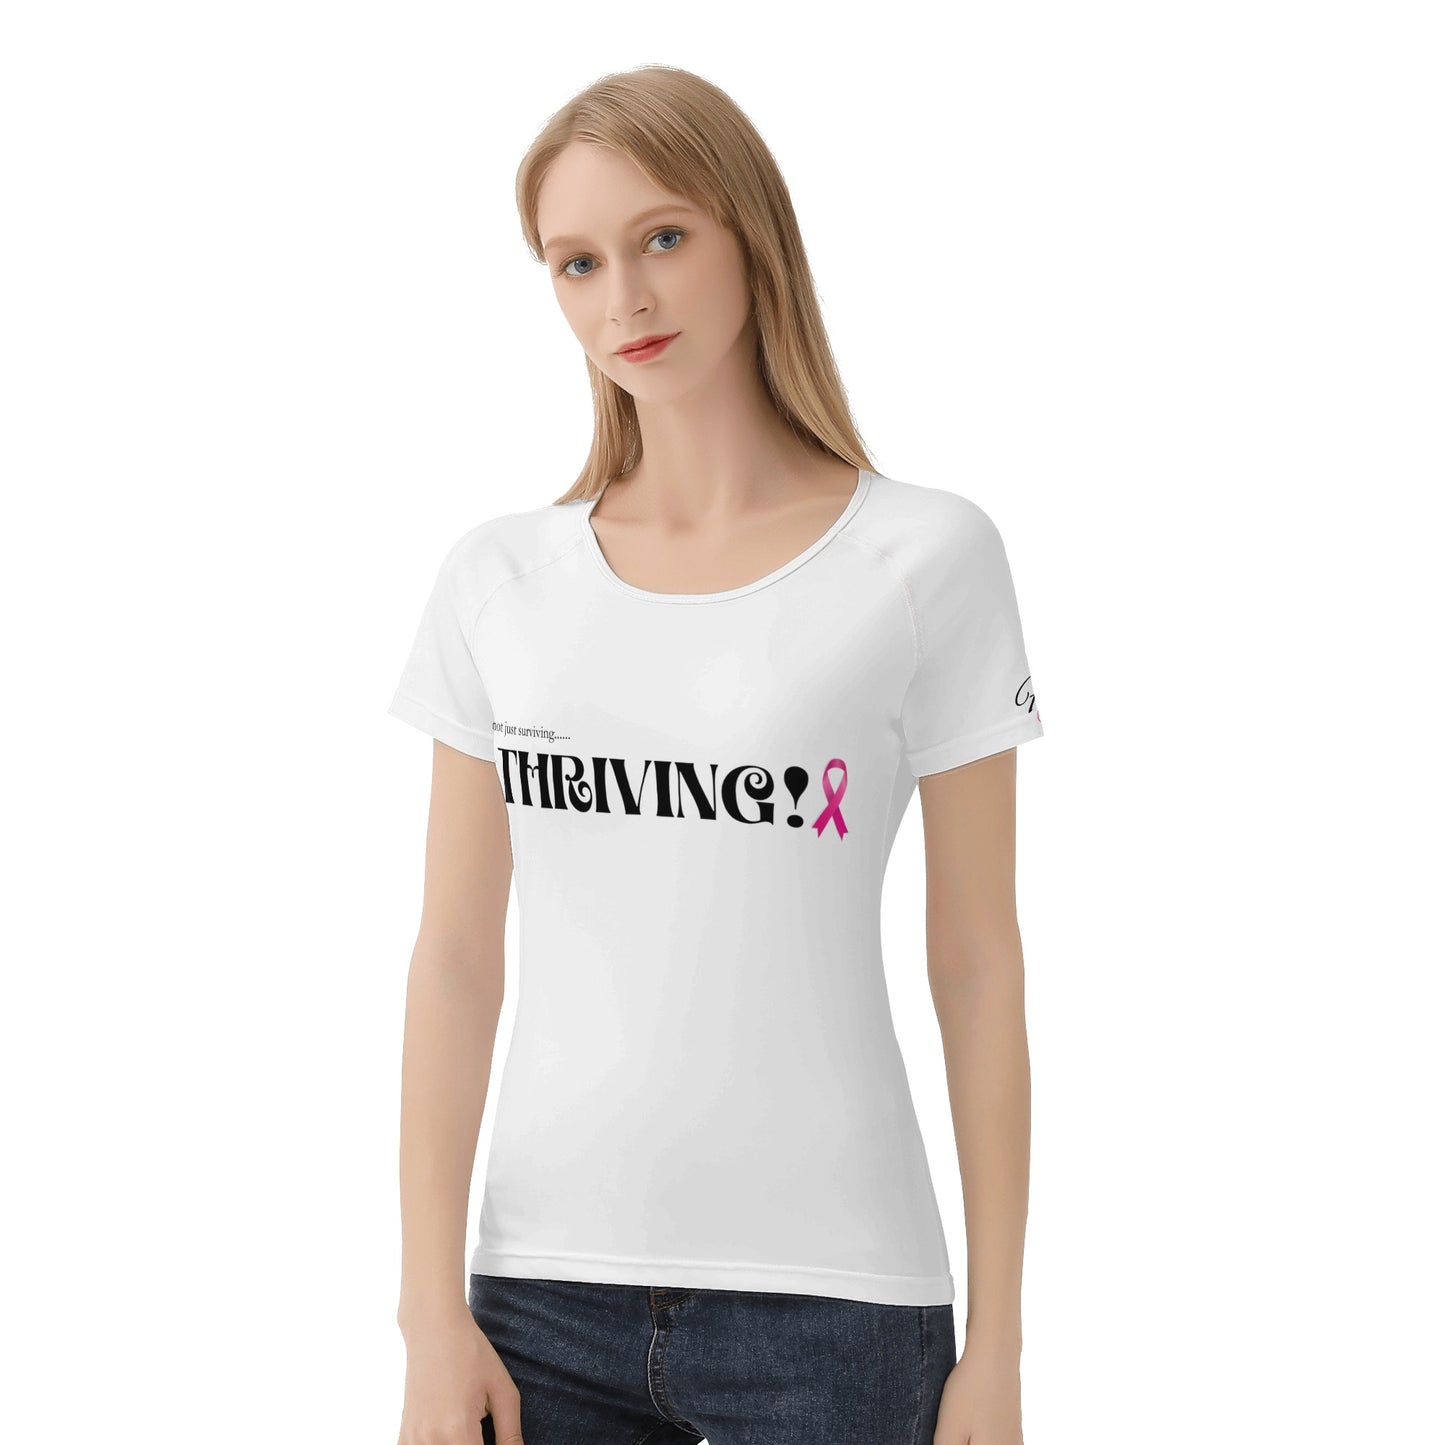 F-cancer; Not just surviving, Thriving women’s fitted t-shirt